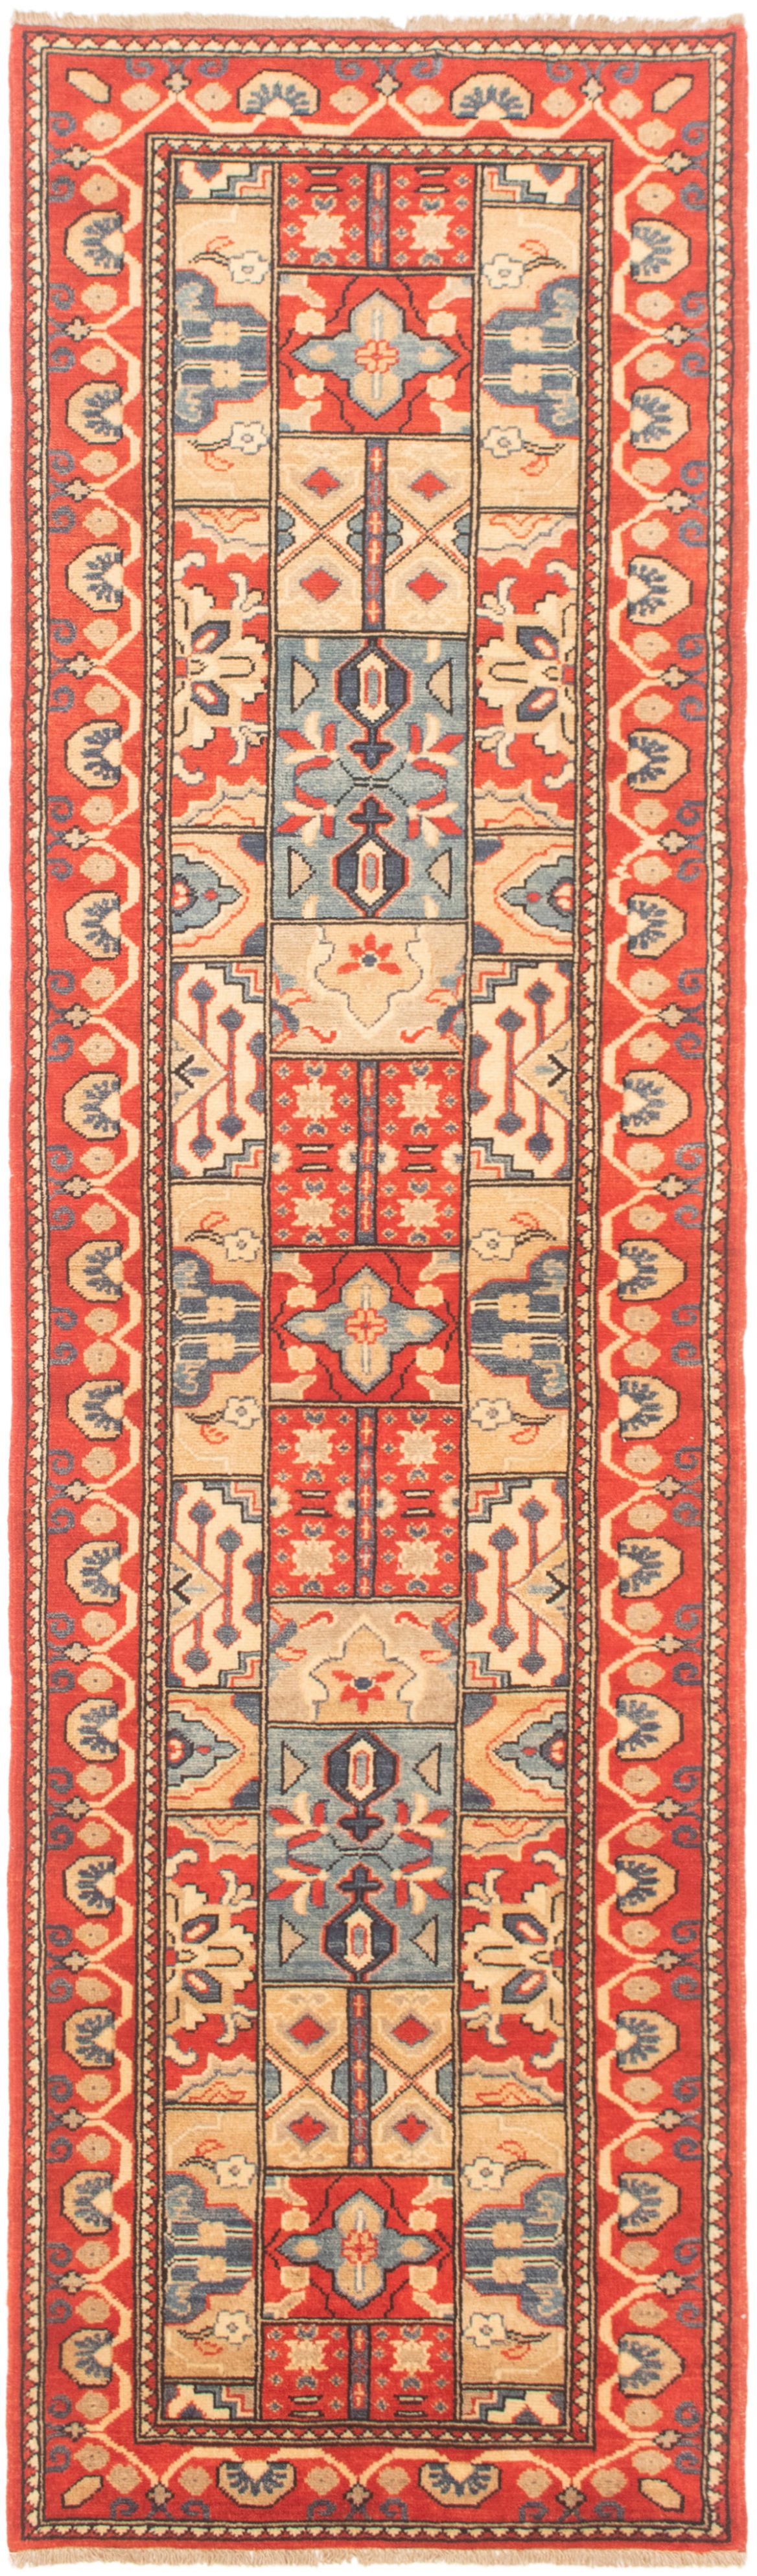 Hand-knotted Finest Gazni Red Wool Rug 2'7" x 9'11" Size: 2'7" x 9'11"  